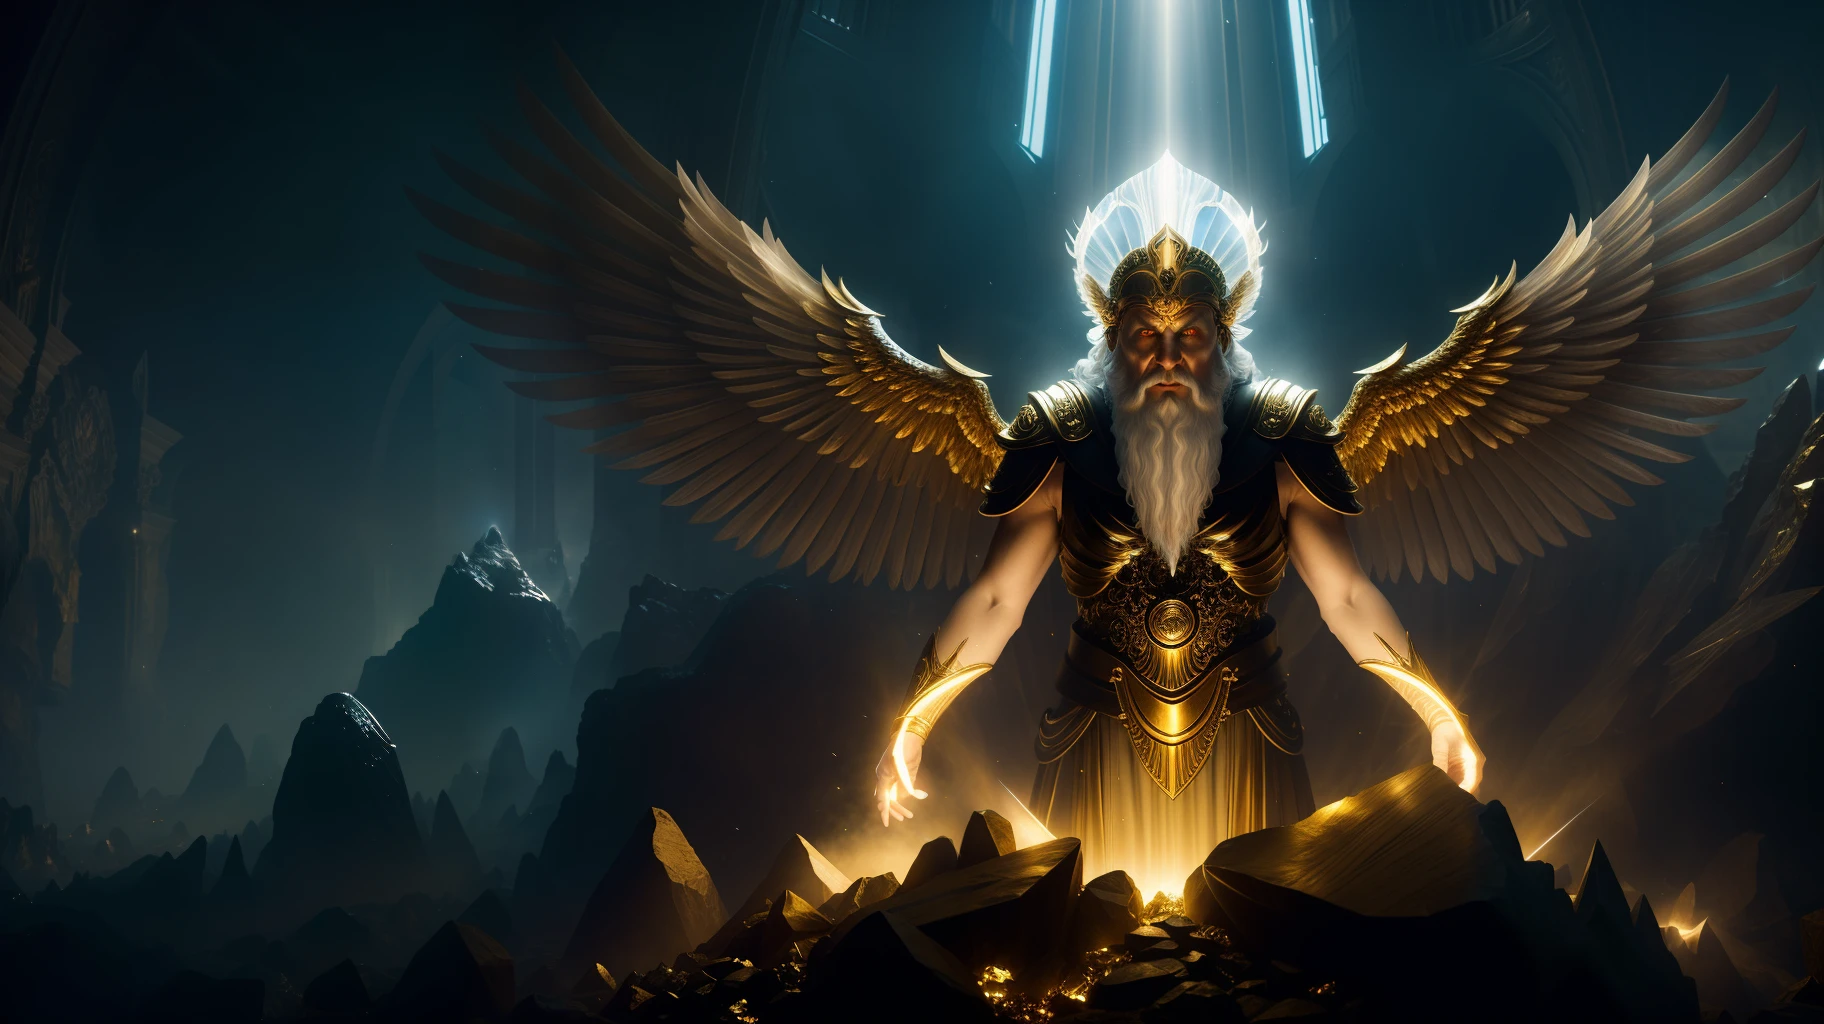 super high resolution, best quality, photo, 8k, (photorealistic: 1.2), cinematic lighting, An old man shaped like a fantz wlop, giant man with beard in bright white robes and floating on the crystal throne floating on crystal clouds, yellow eyes, bright yellow light emitted from the throne, precious stones floating in the sky, God, with beams of light enveloping his body,  with large translucent, feathered wings on the crystal throne, wings are open, golden light (halo:1.2) over your head, abdominal muscles dressed in medieval golden armor, beard, masculine, dark, masterpiece, best quality, intricate details, snow environment and crystals in the background, crystal cathedral, portal of the future, 3D light, HD, magic, god of light, backlighting,  detailed face, DREAD, depth of field, soft lighting, tone mapped, highly detailed, concept art, smooth, sharp focus, dramatic lighting, highly detailed art, cinematic, 8K, amazing shadows (highly detailed background: 1.2)